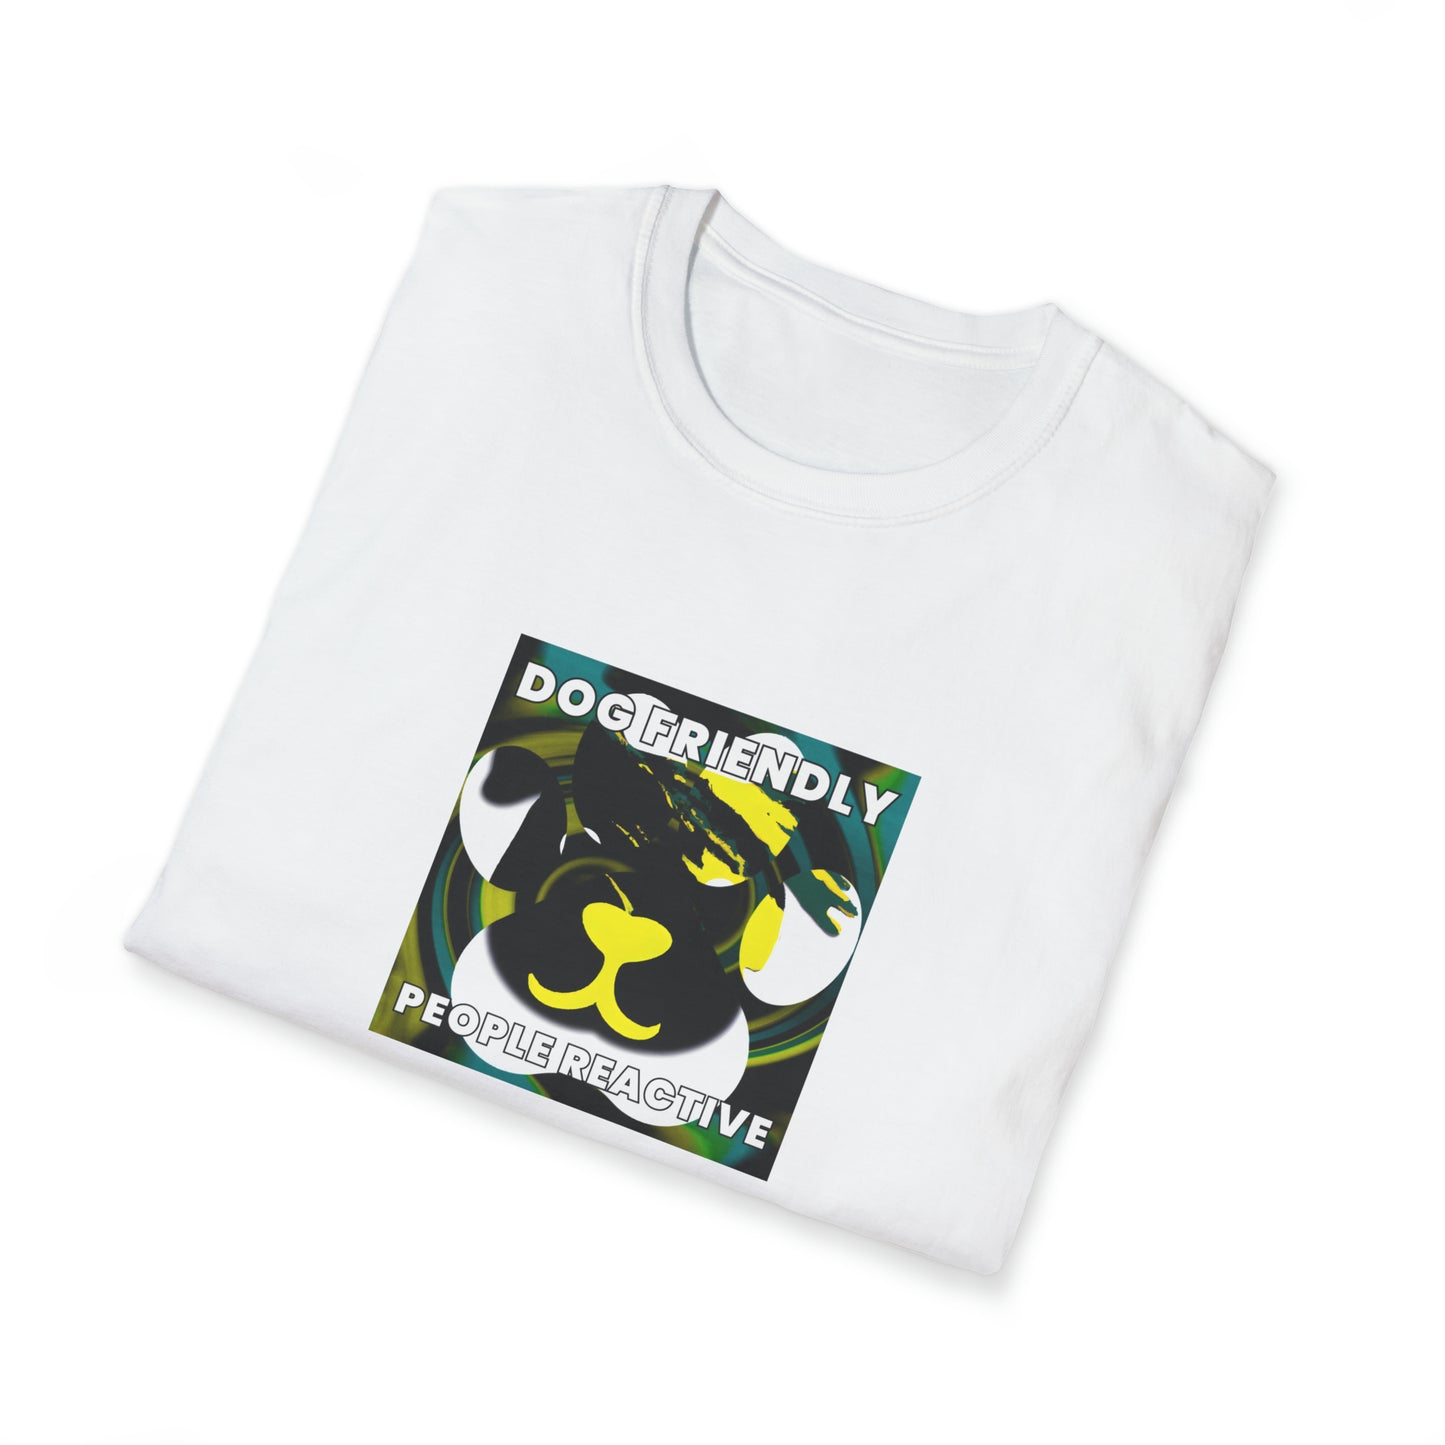 G-Funk Swagg - "Dog Friendly, People Reactive" (Yellow Blue Swirl) Unisex Tee